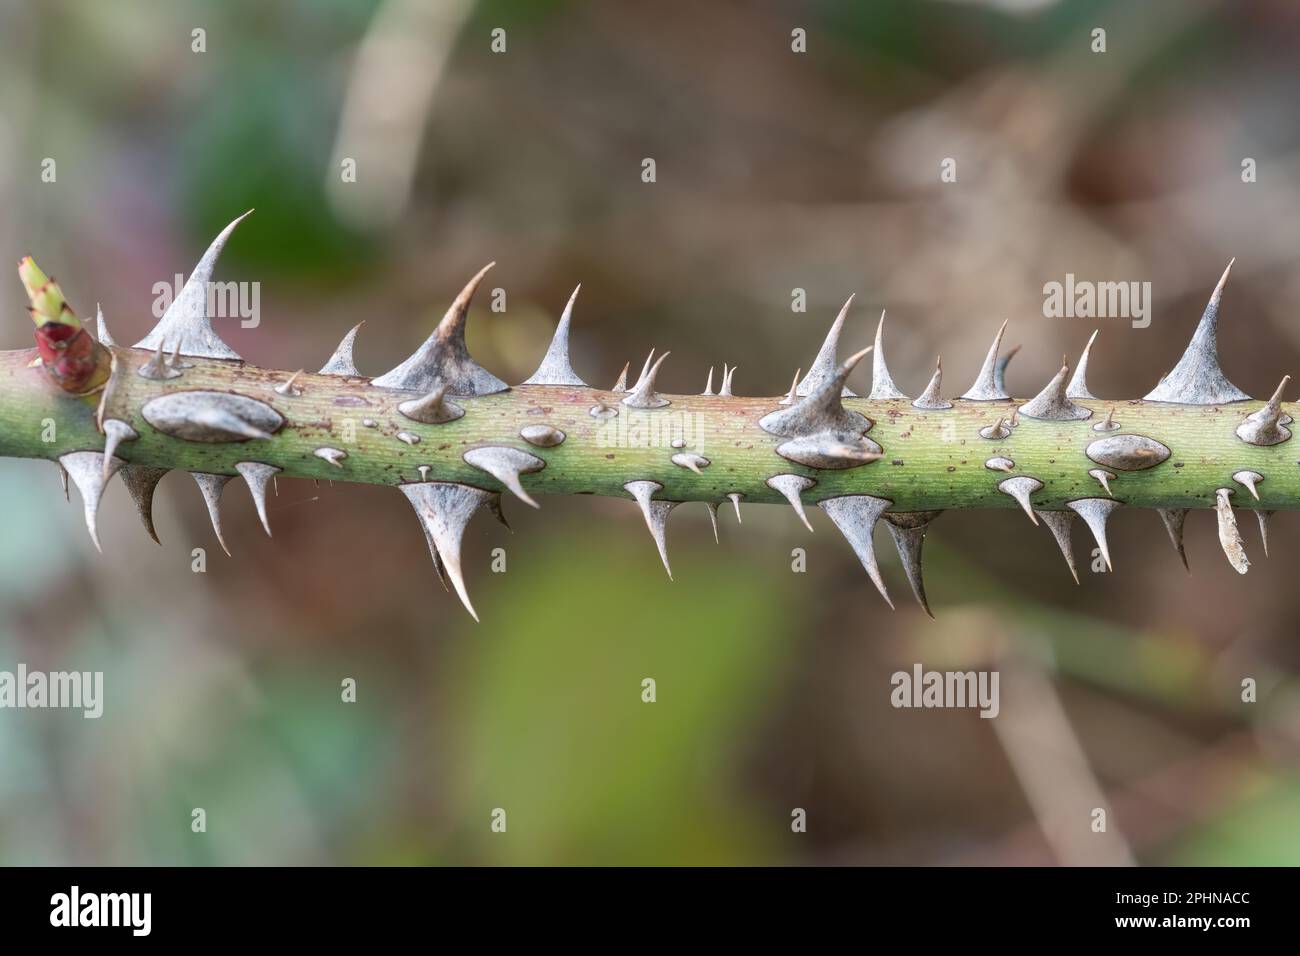 Prickles on wild rose stem, a mechanical plant defence mechanism Stock Photo